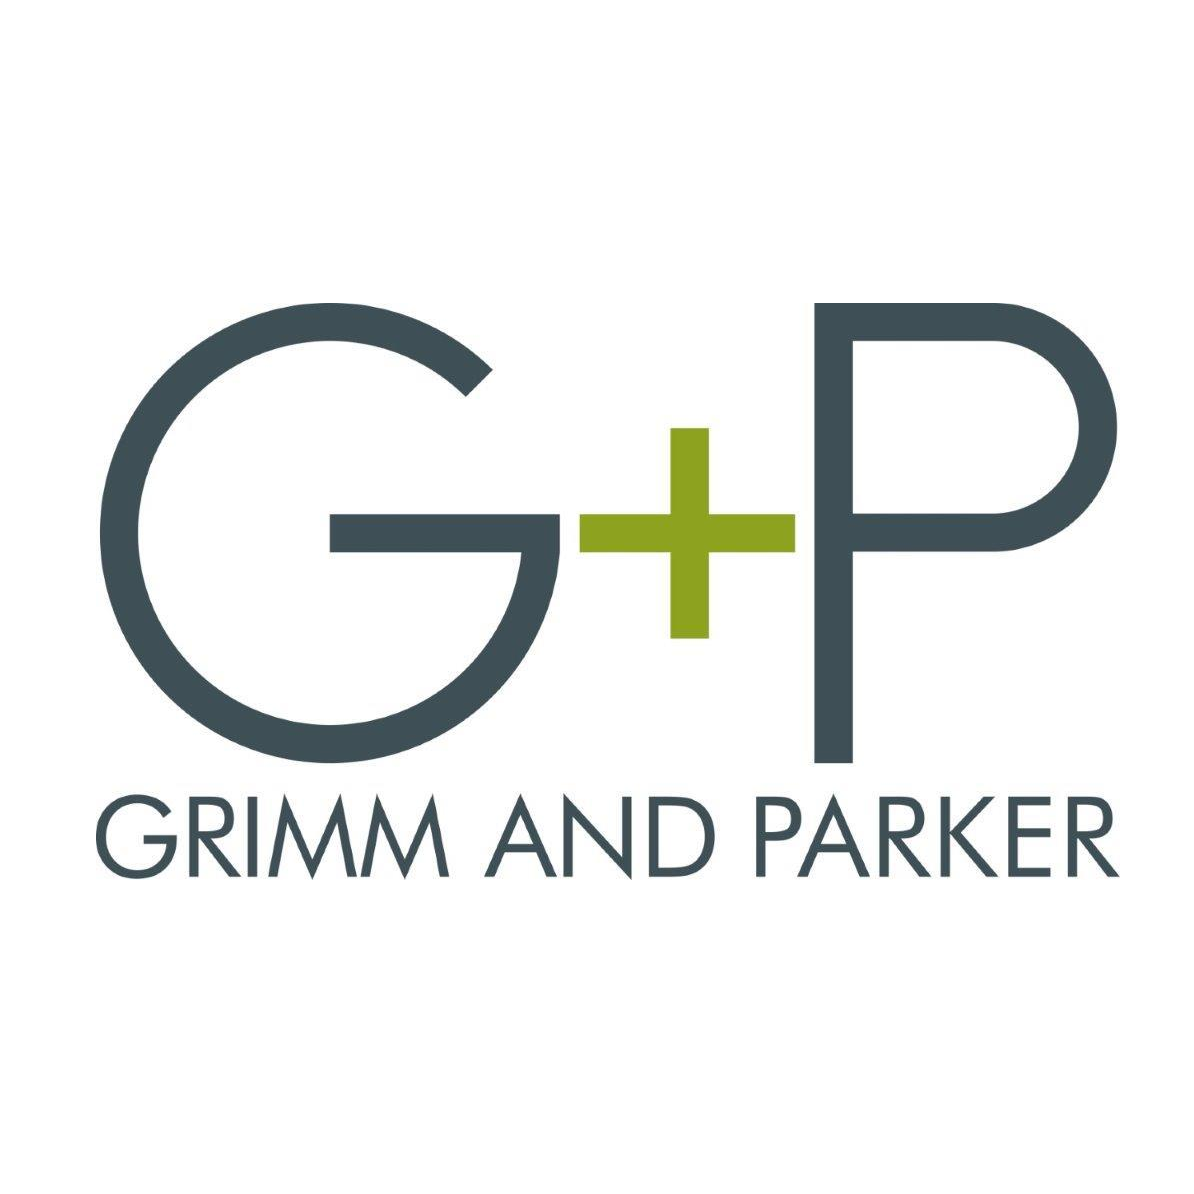 Grimm and Parker